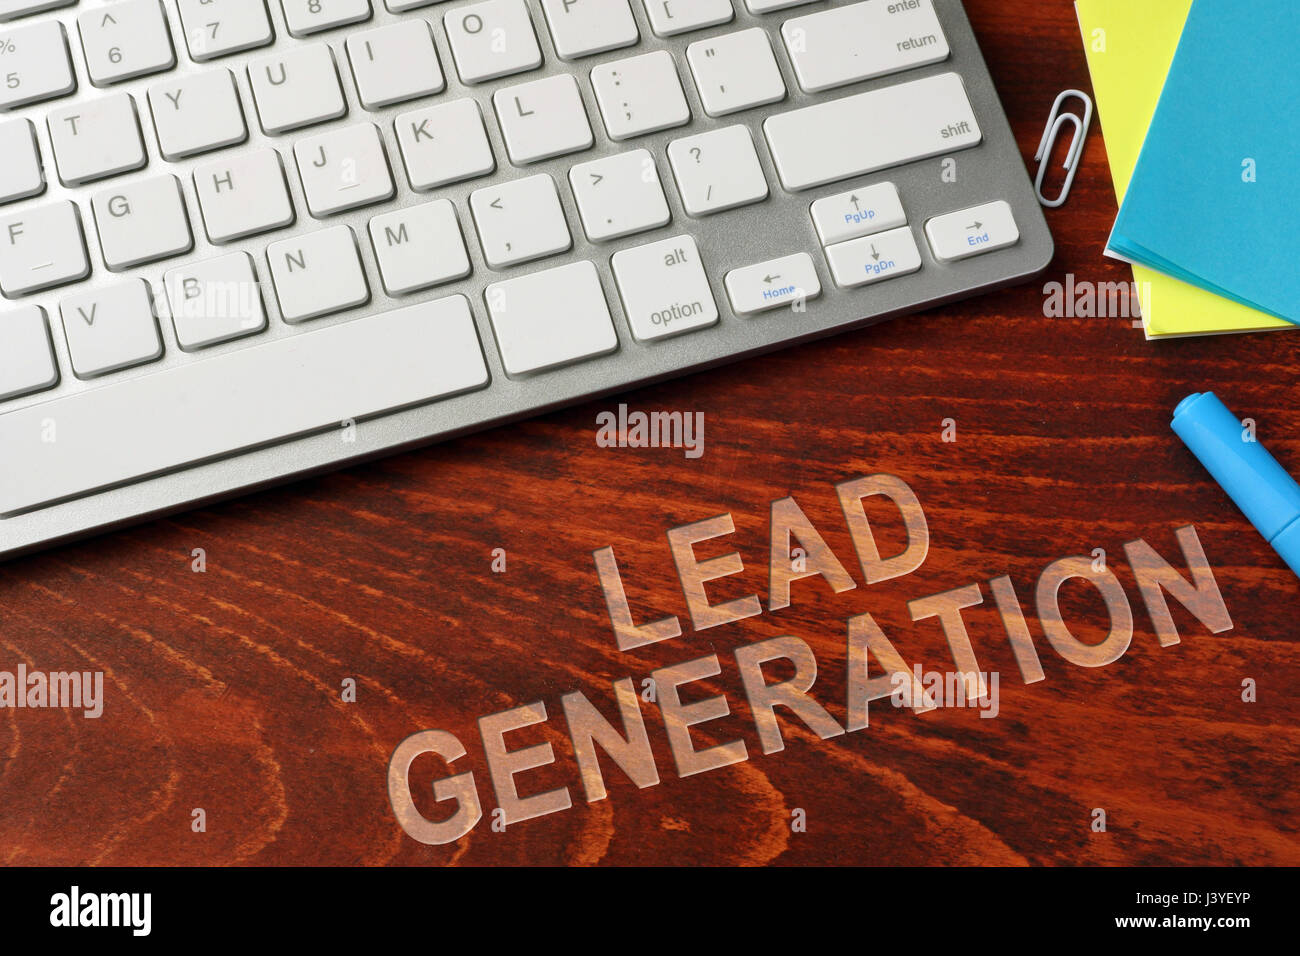 Lead generation written on a wooden surface. Stock Photo